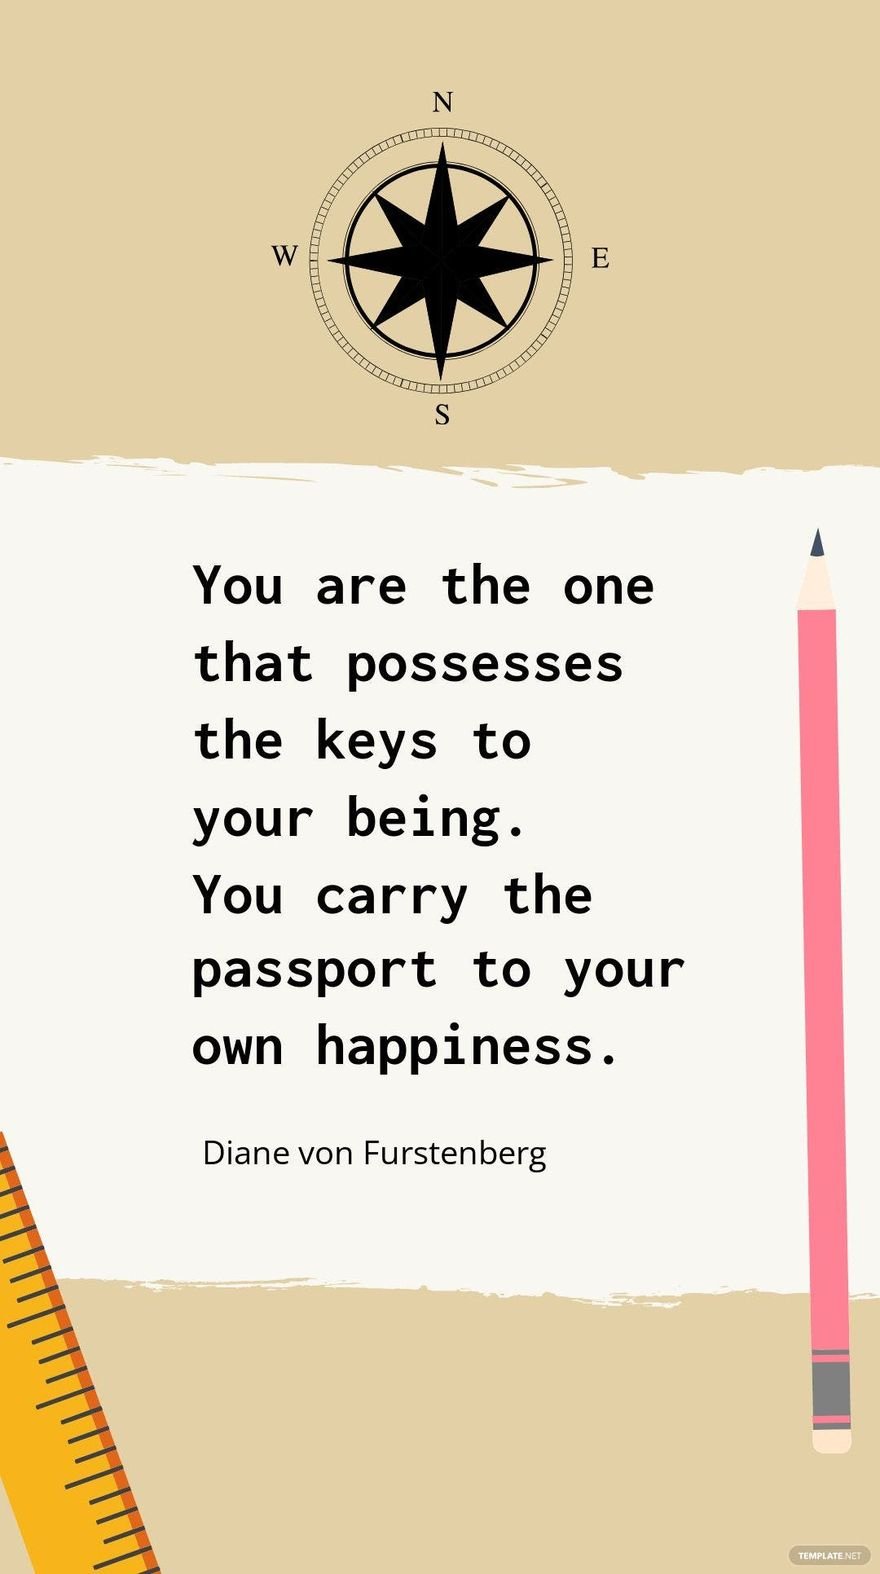 Diane von Furstenberg - You are the one that possesses the keys to your being. You carry the passport to your own happiness.